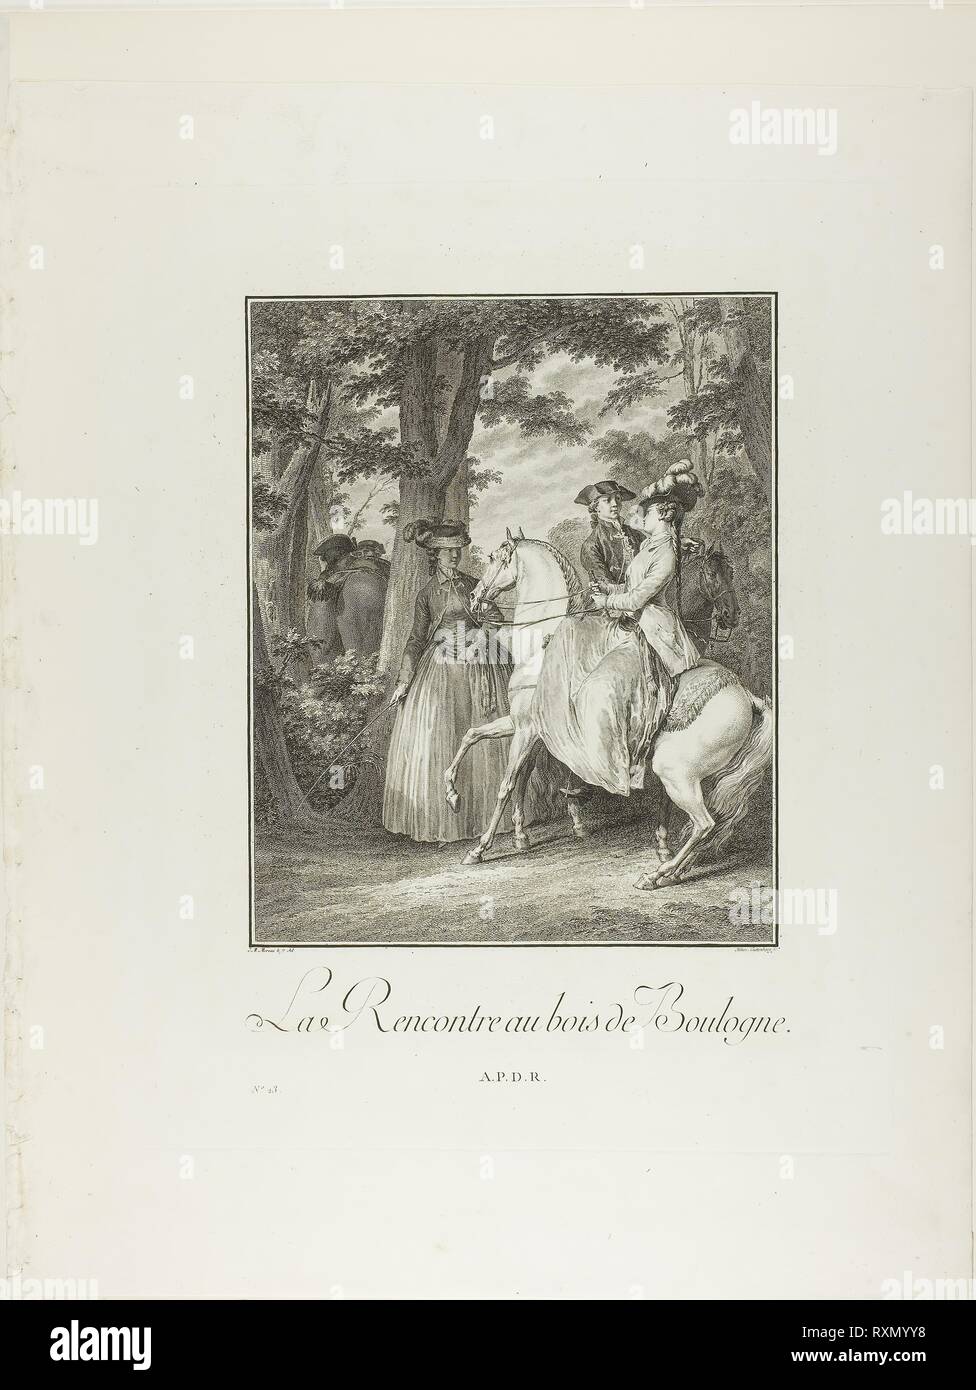 Meeting in the Woods of Boulogne, from Monument du Costume Physique et Moral de la fin du Dix-huitième siècle. Heinrich Guttenberg (German, 1749-1818); after Jean Michel Moreau (French, 1741-1814); published by Laurent-François Prault (French 1712-1780). Date: 1776-1783. Dimensions: 272 x 220 mm (image); 411 x 321 mm (plate); 514 x 410 mm (sheet, folded). Engraving on paper. Origin: Germany. Museum: The Chicago Art Institute. Stock Photo